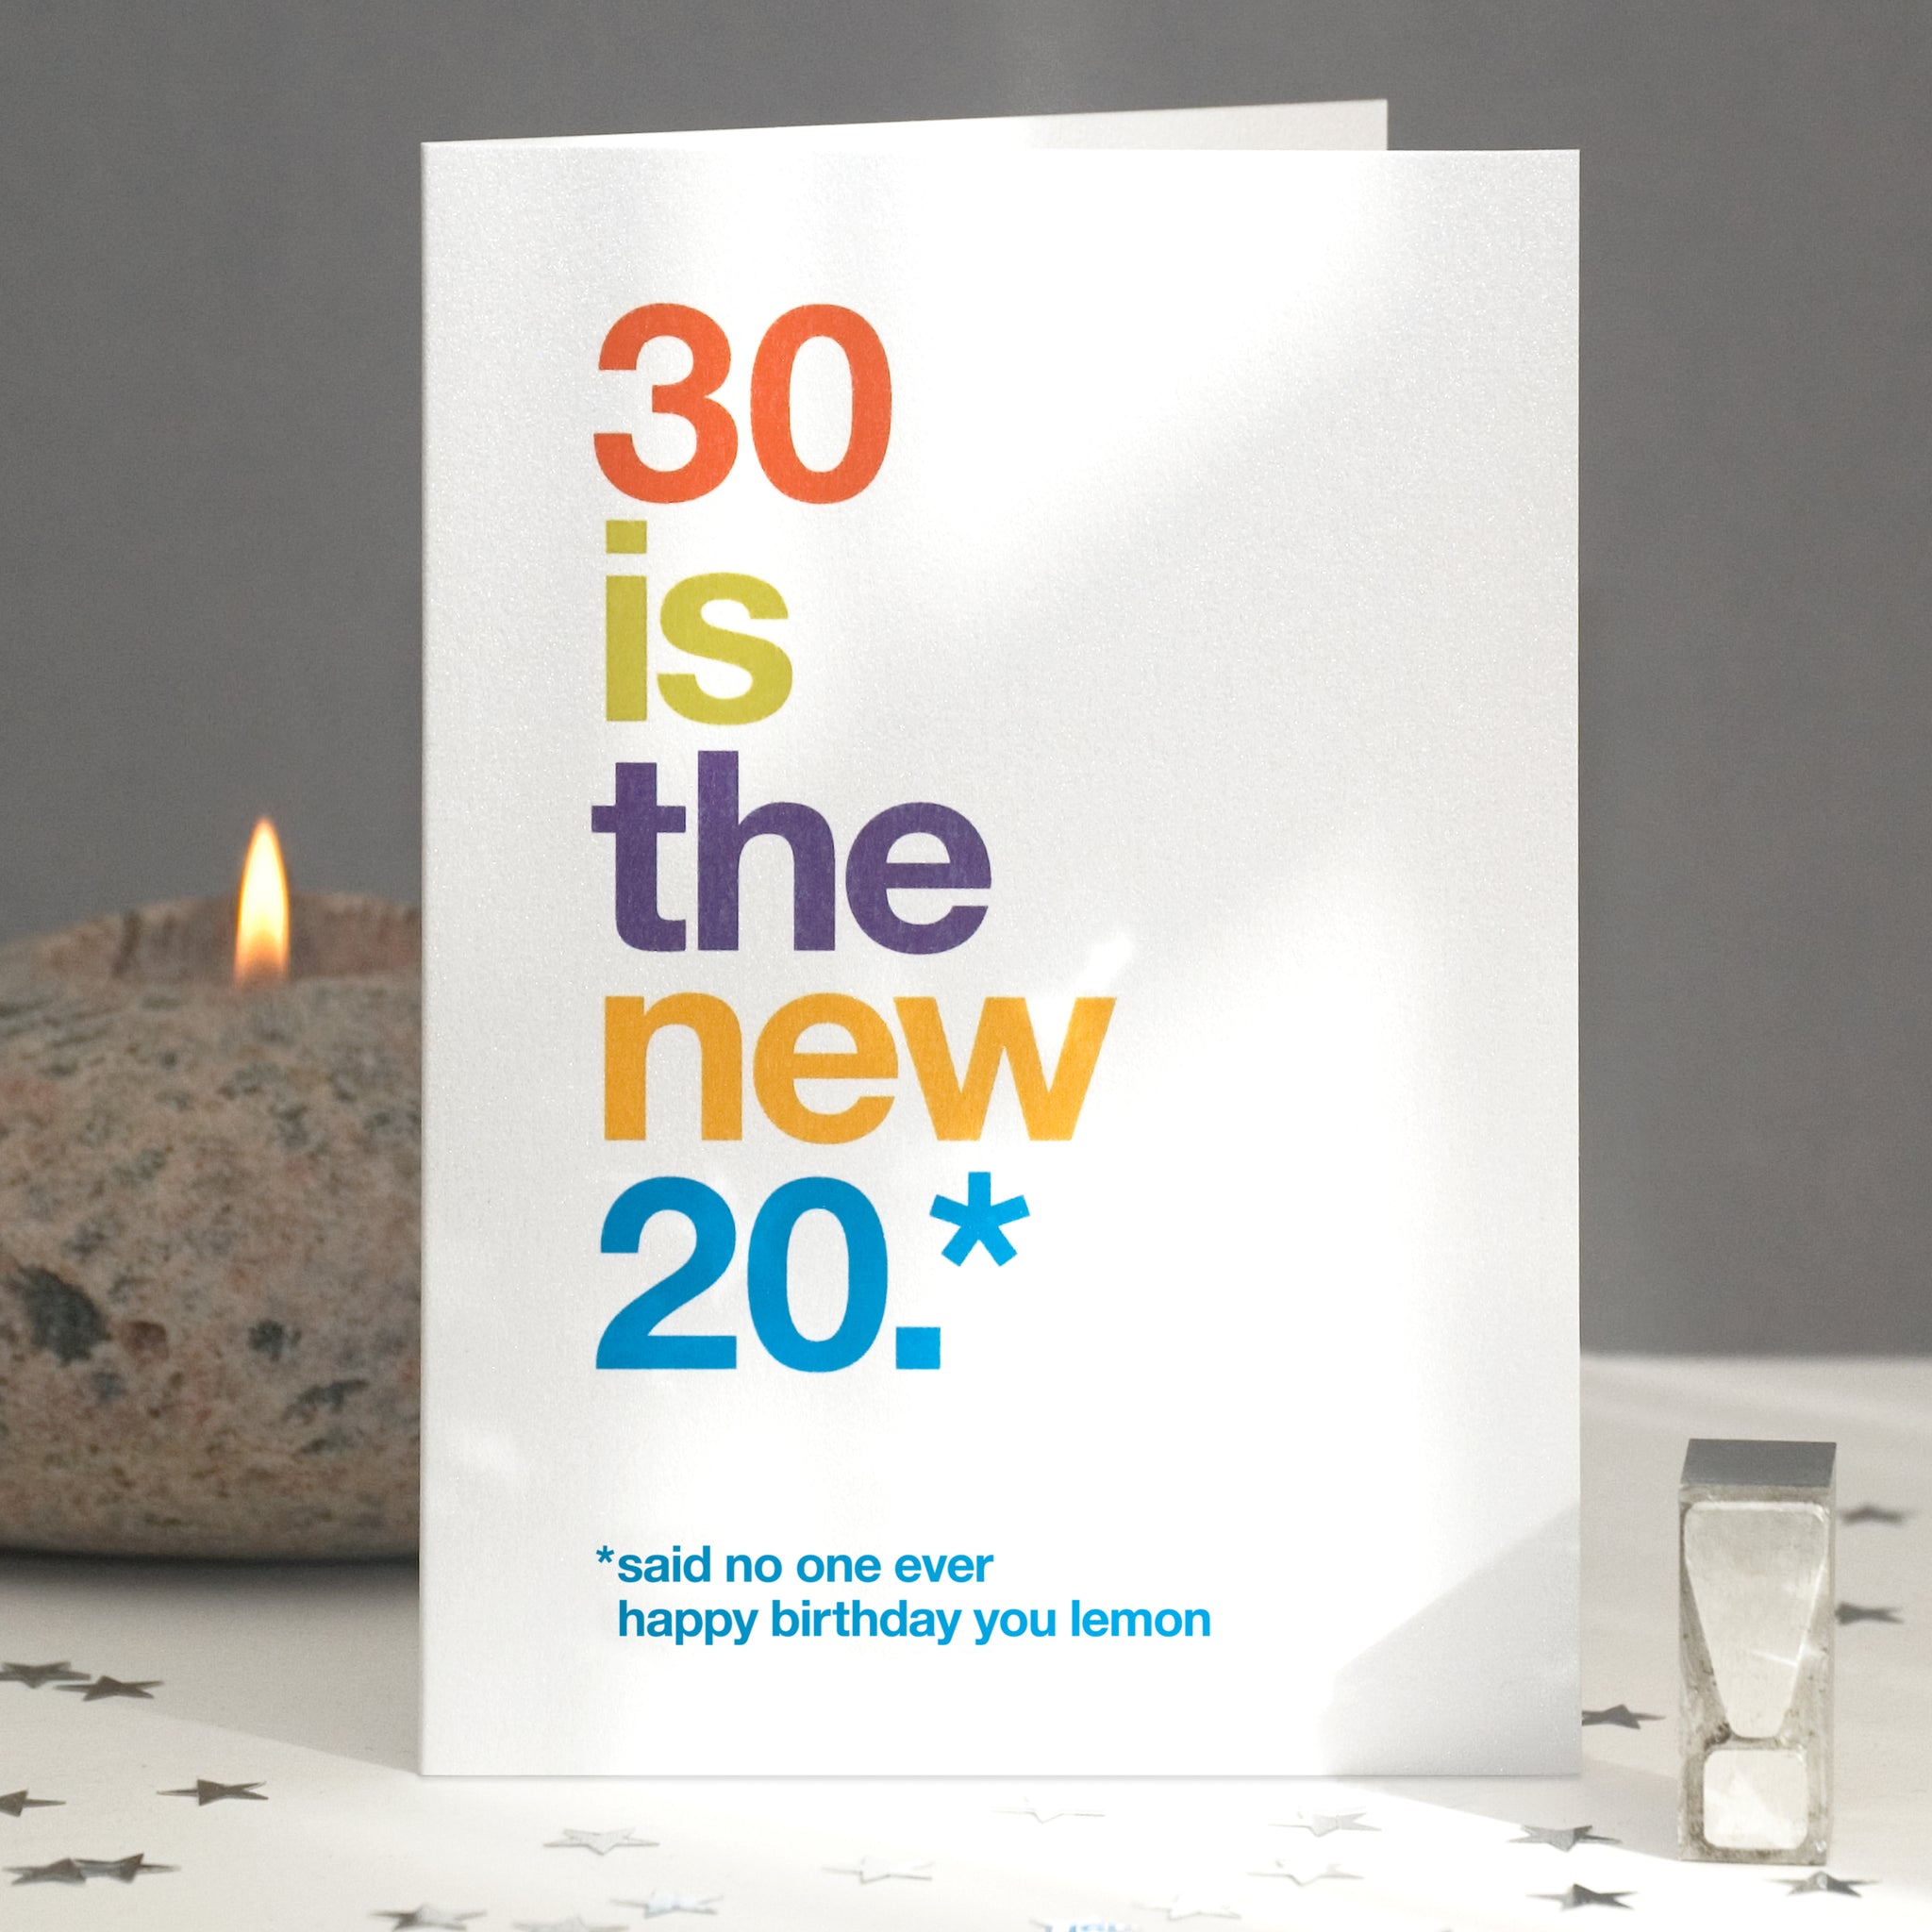 A funny birthday card saying '30 is the new 20, said no one ever, happy birthday you lemon'.